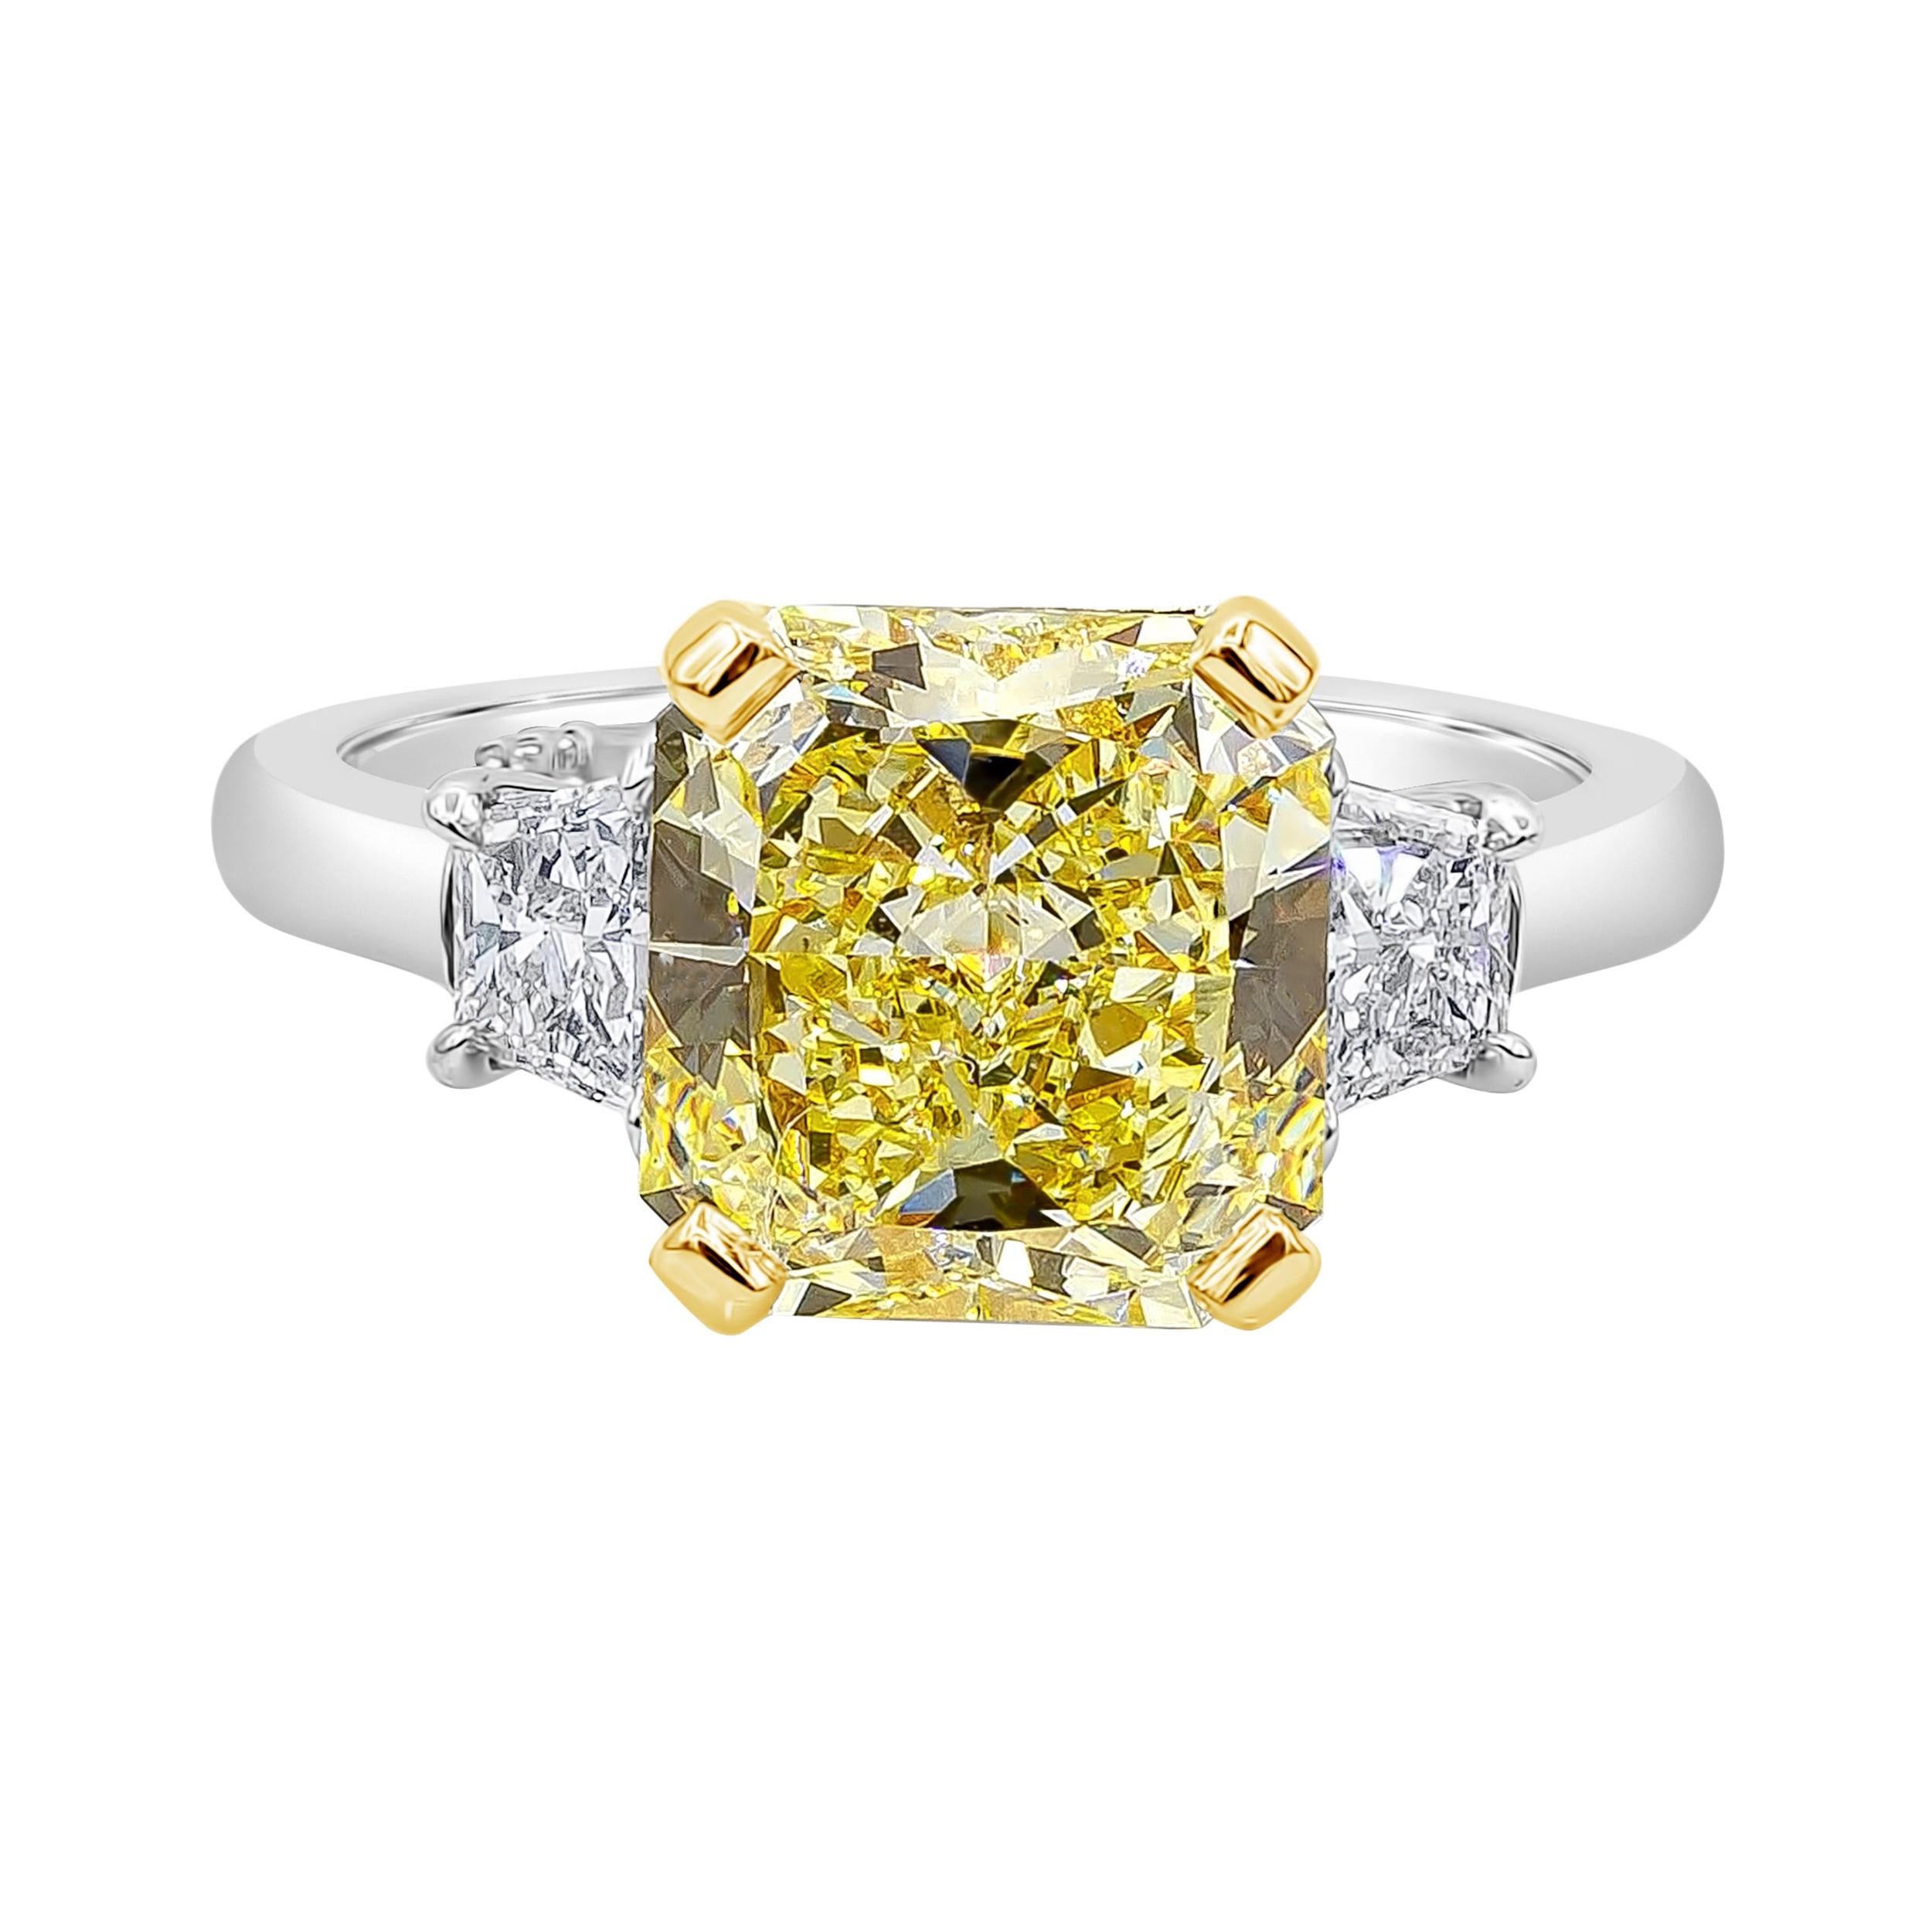 GIA Certified 3.64 Carats Radiant Cut Intense Yellow Diamond Engagement Ring For Sale